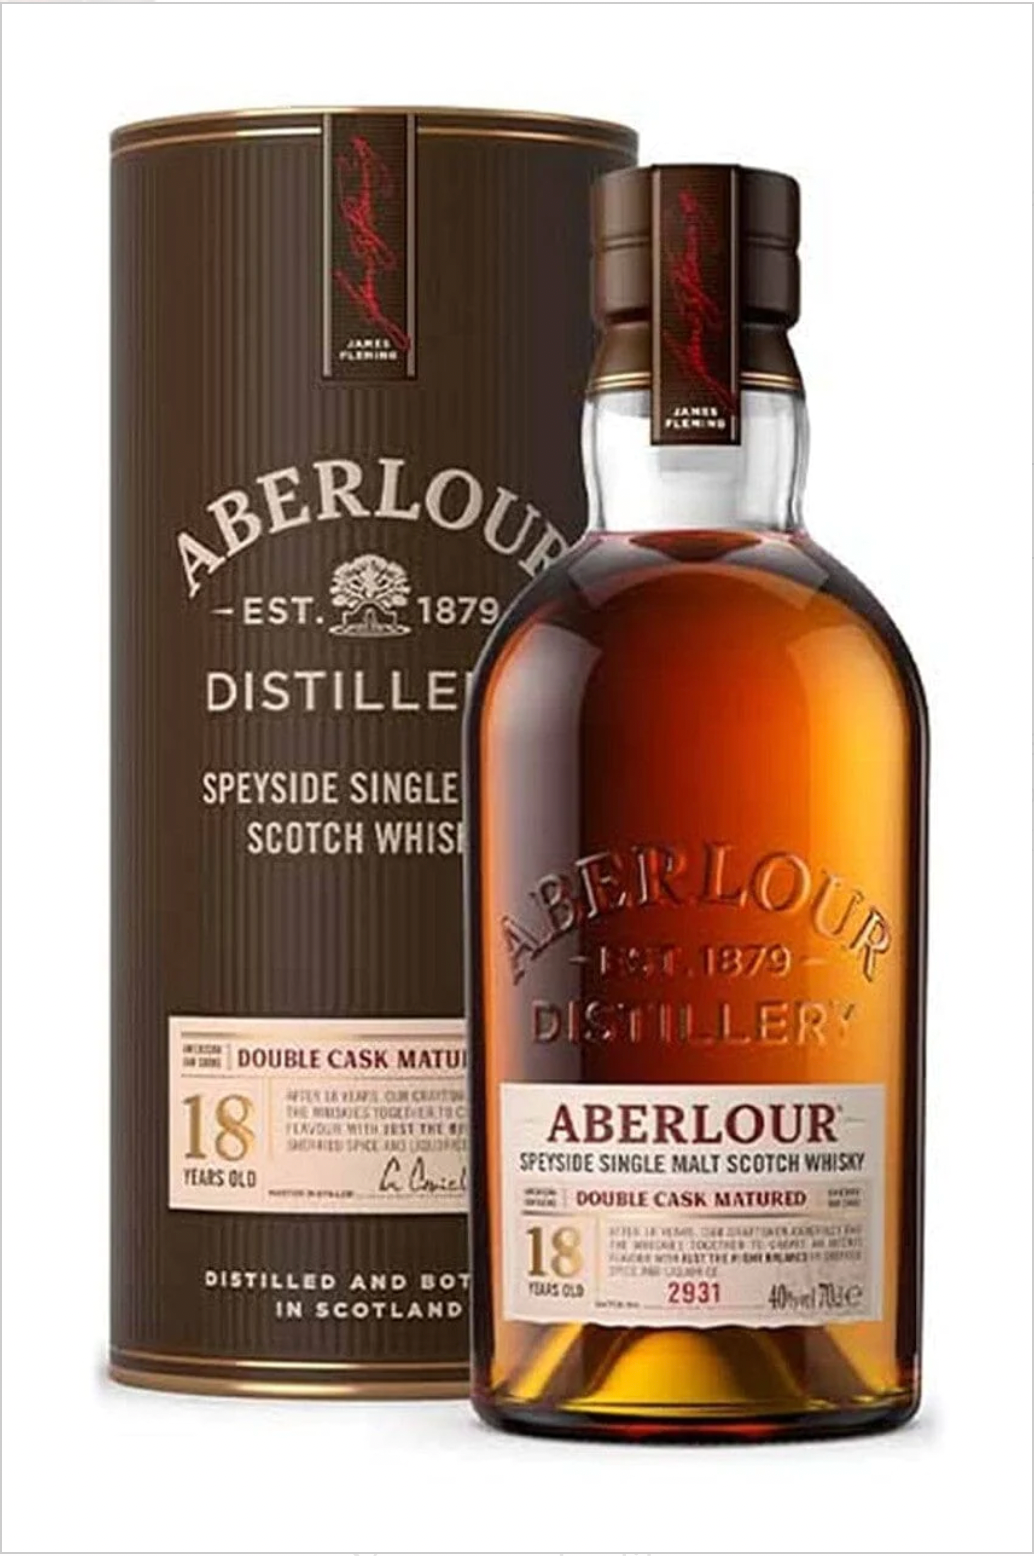 Aberlour 18 Year Old Double Sherry Cask Finish